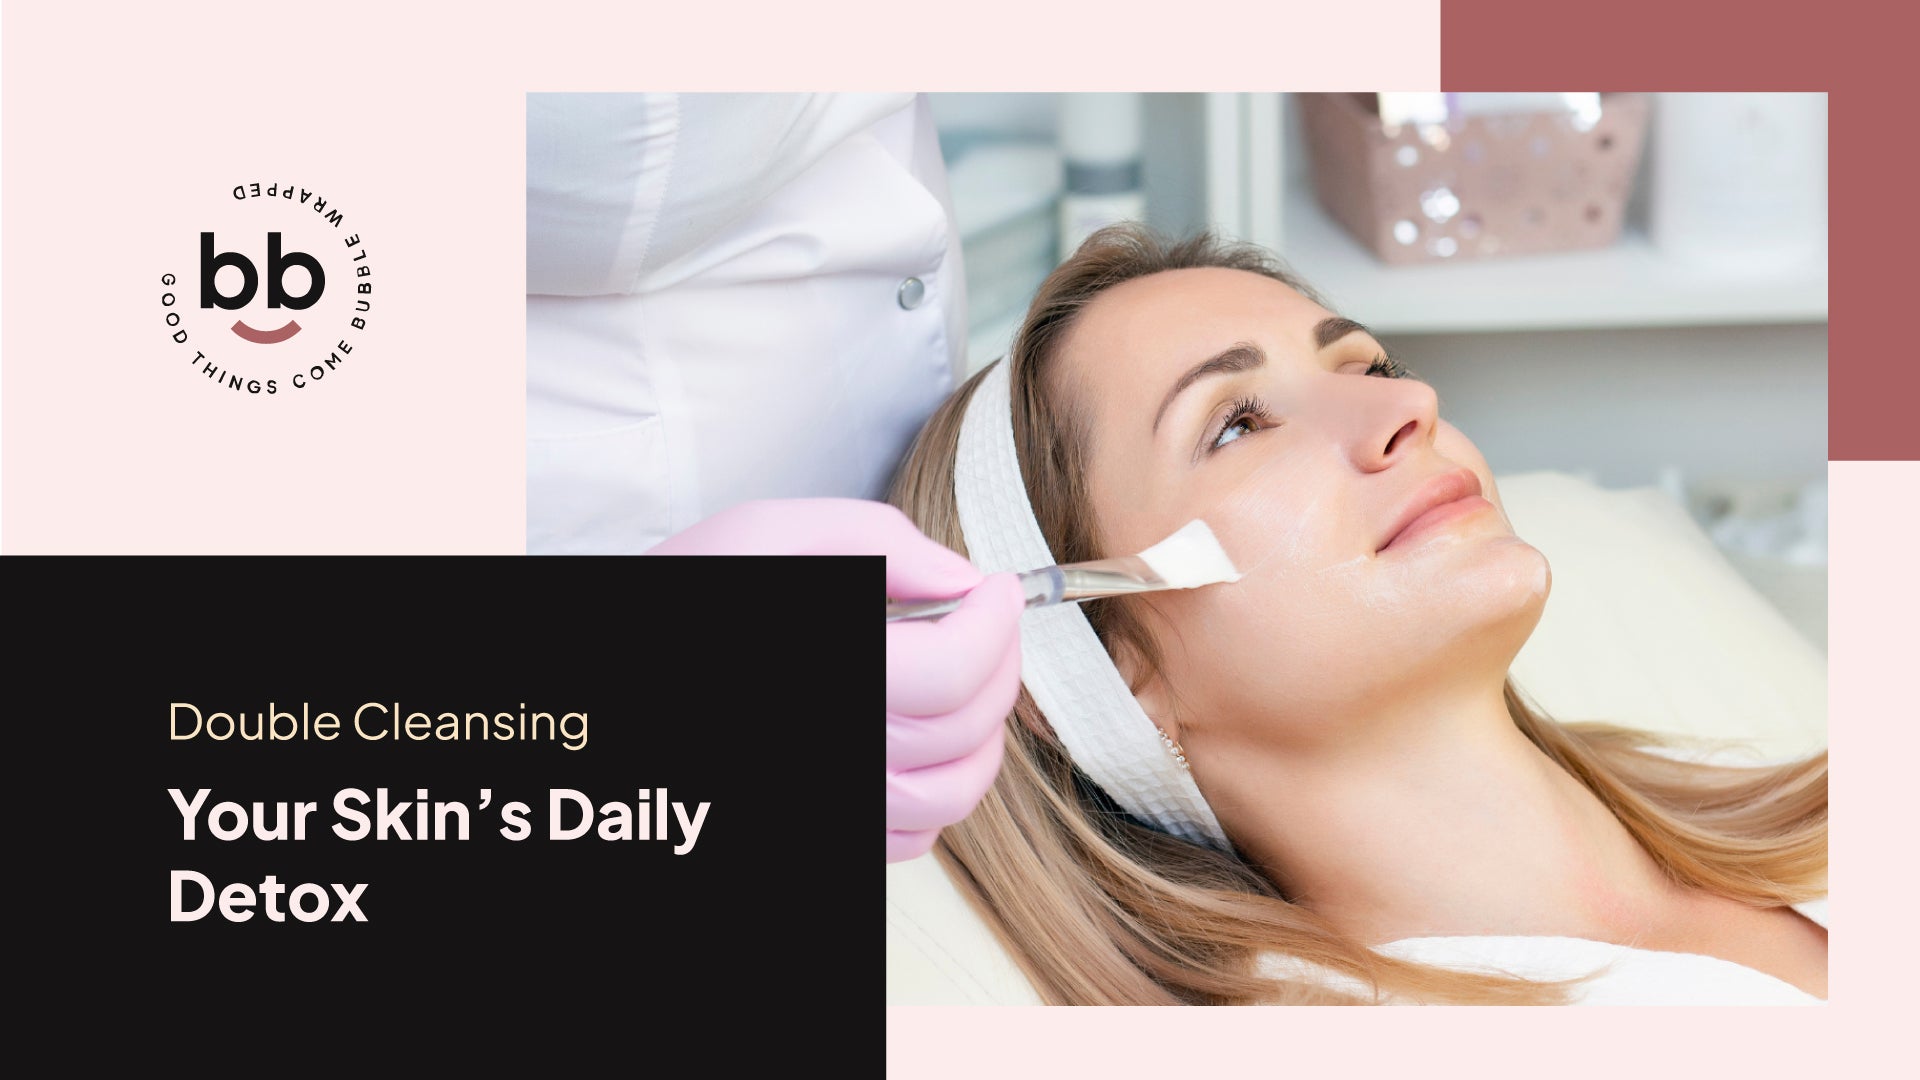 Double Cleansing: Your Skin’s Daily Detox